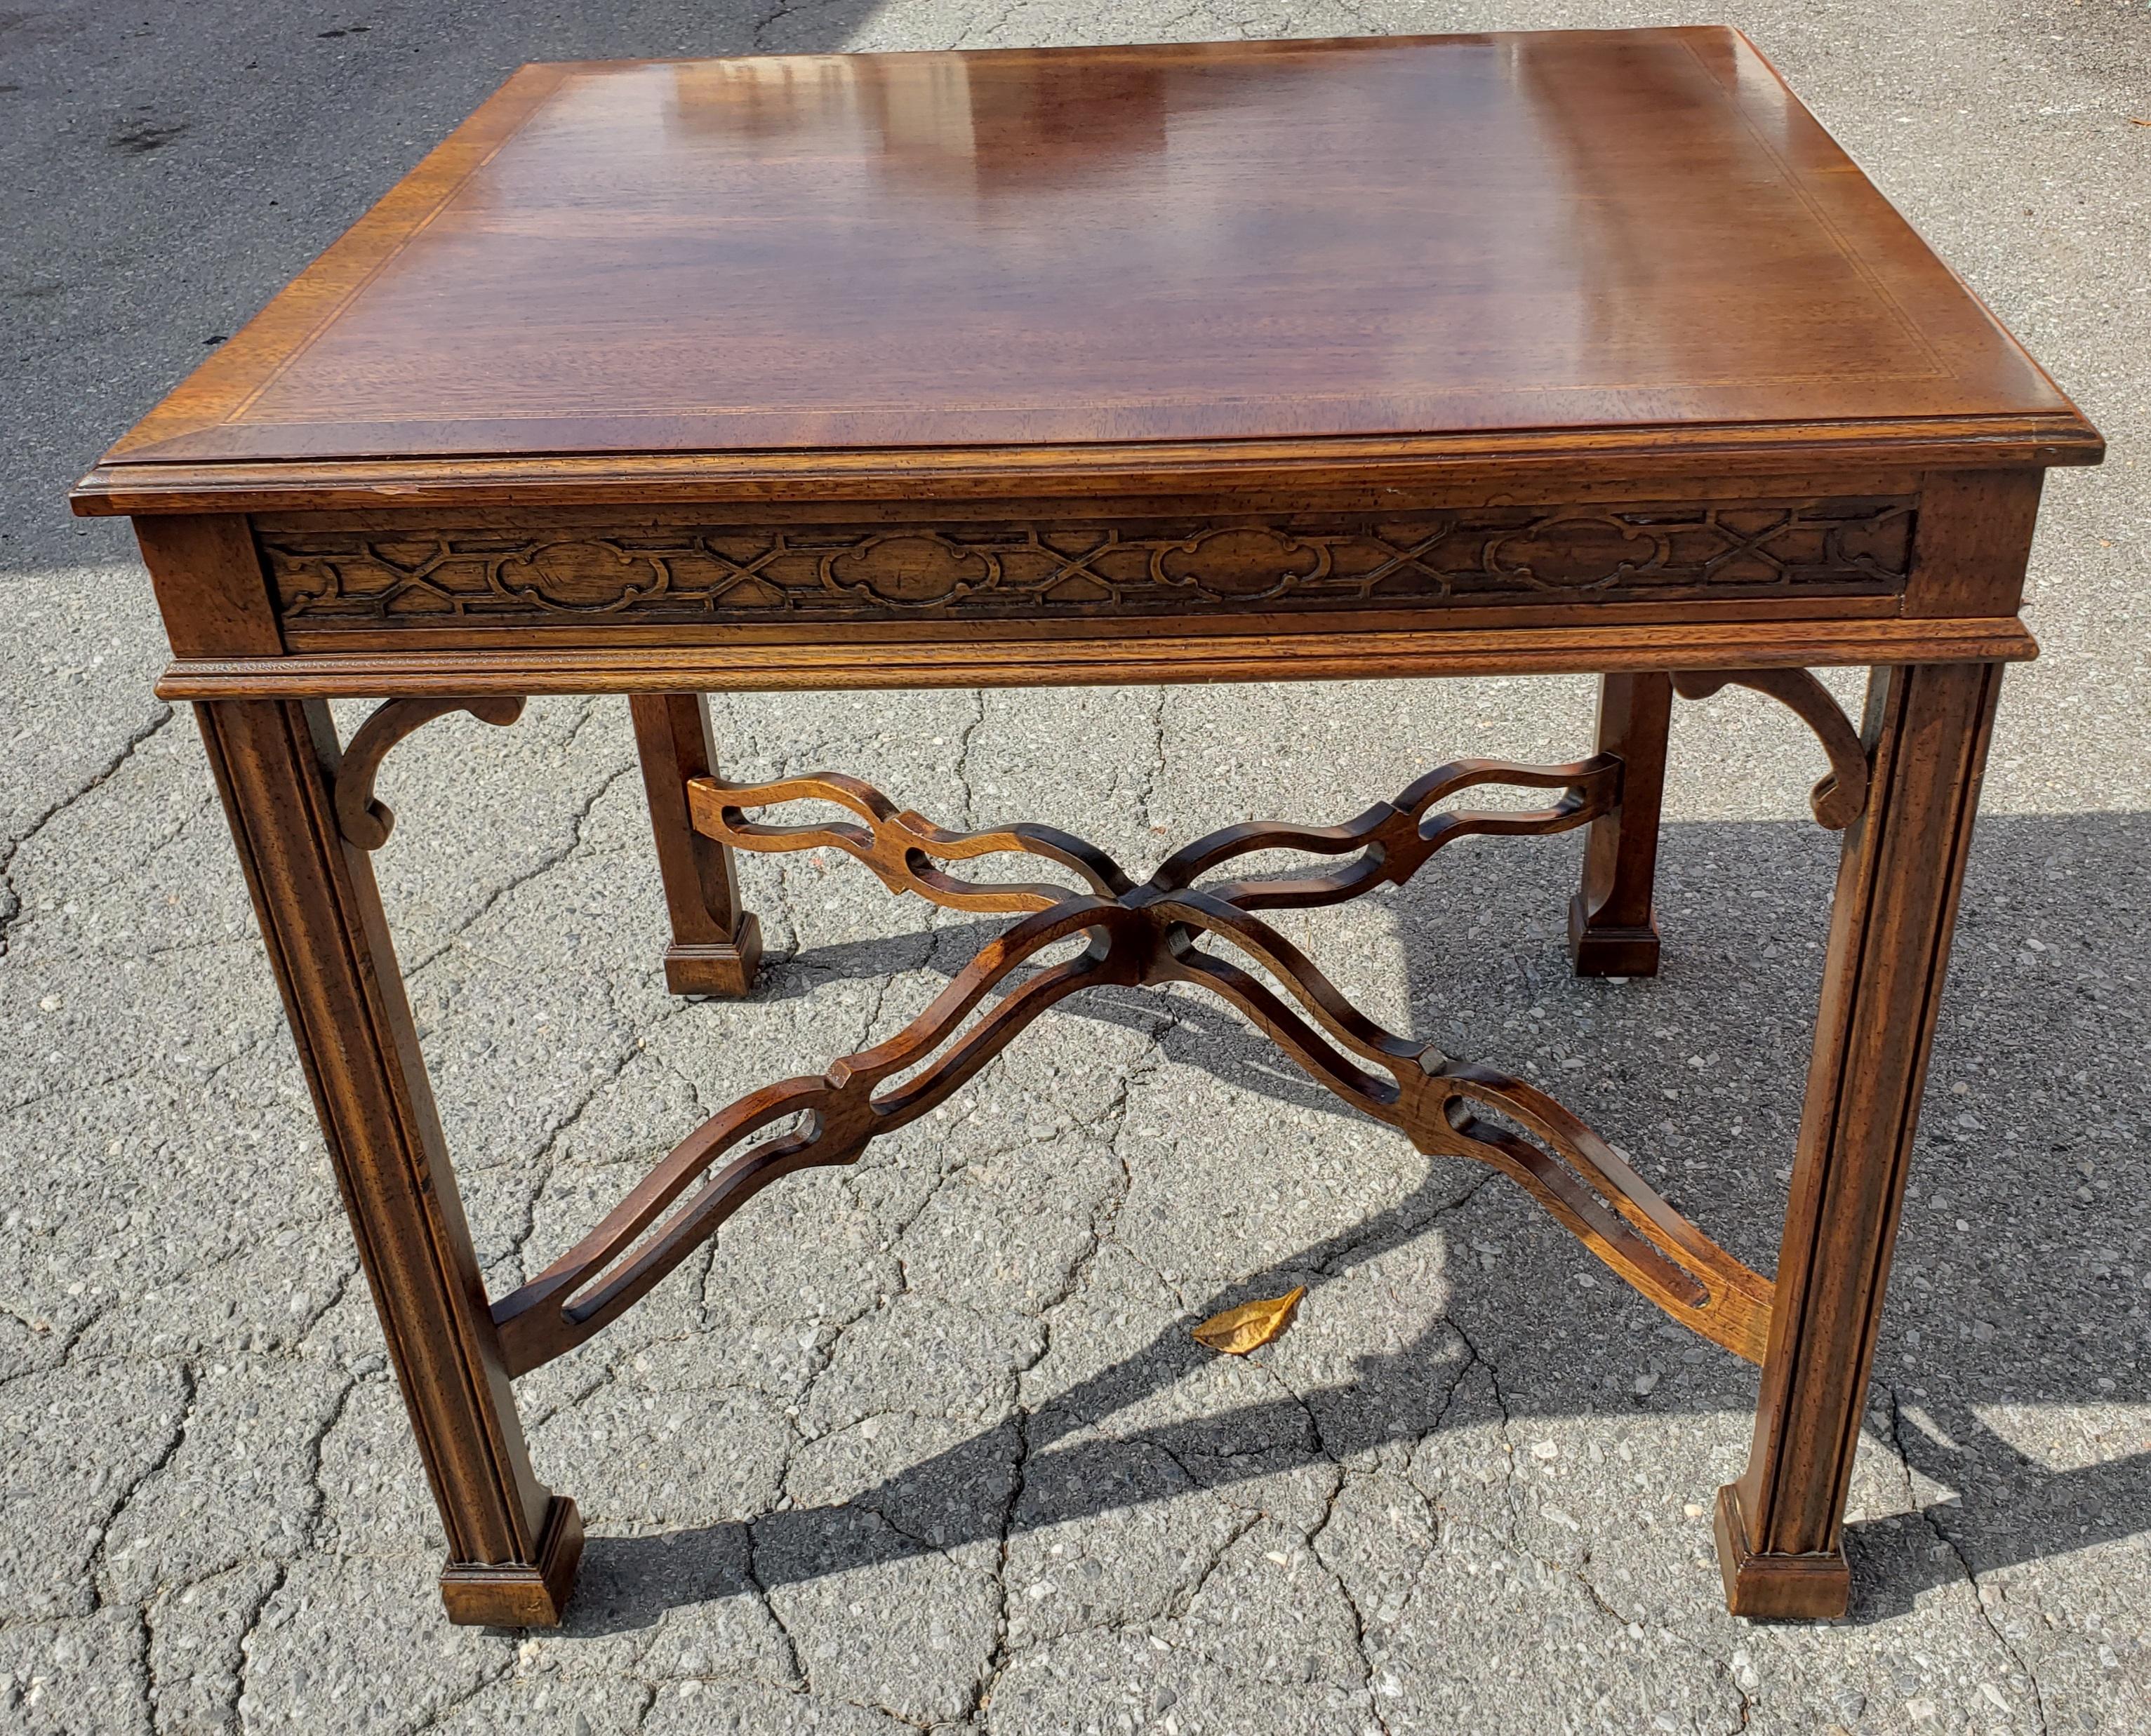 1980s Drexel Heritage Chippendale Walnut Accent Table W/ Fretwork and Banded Top In Good Condition For Sale In Germantown, MD